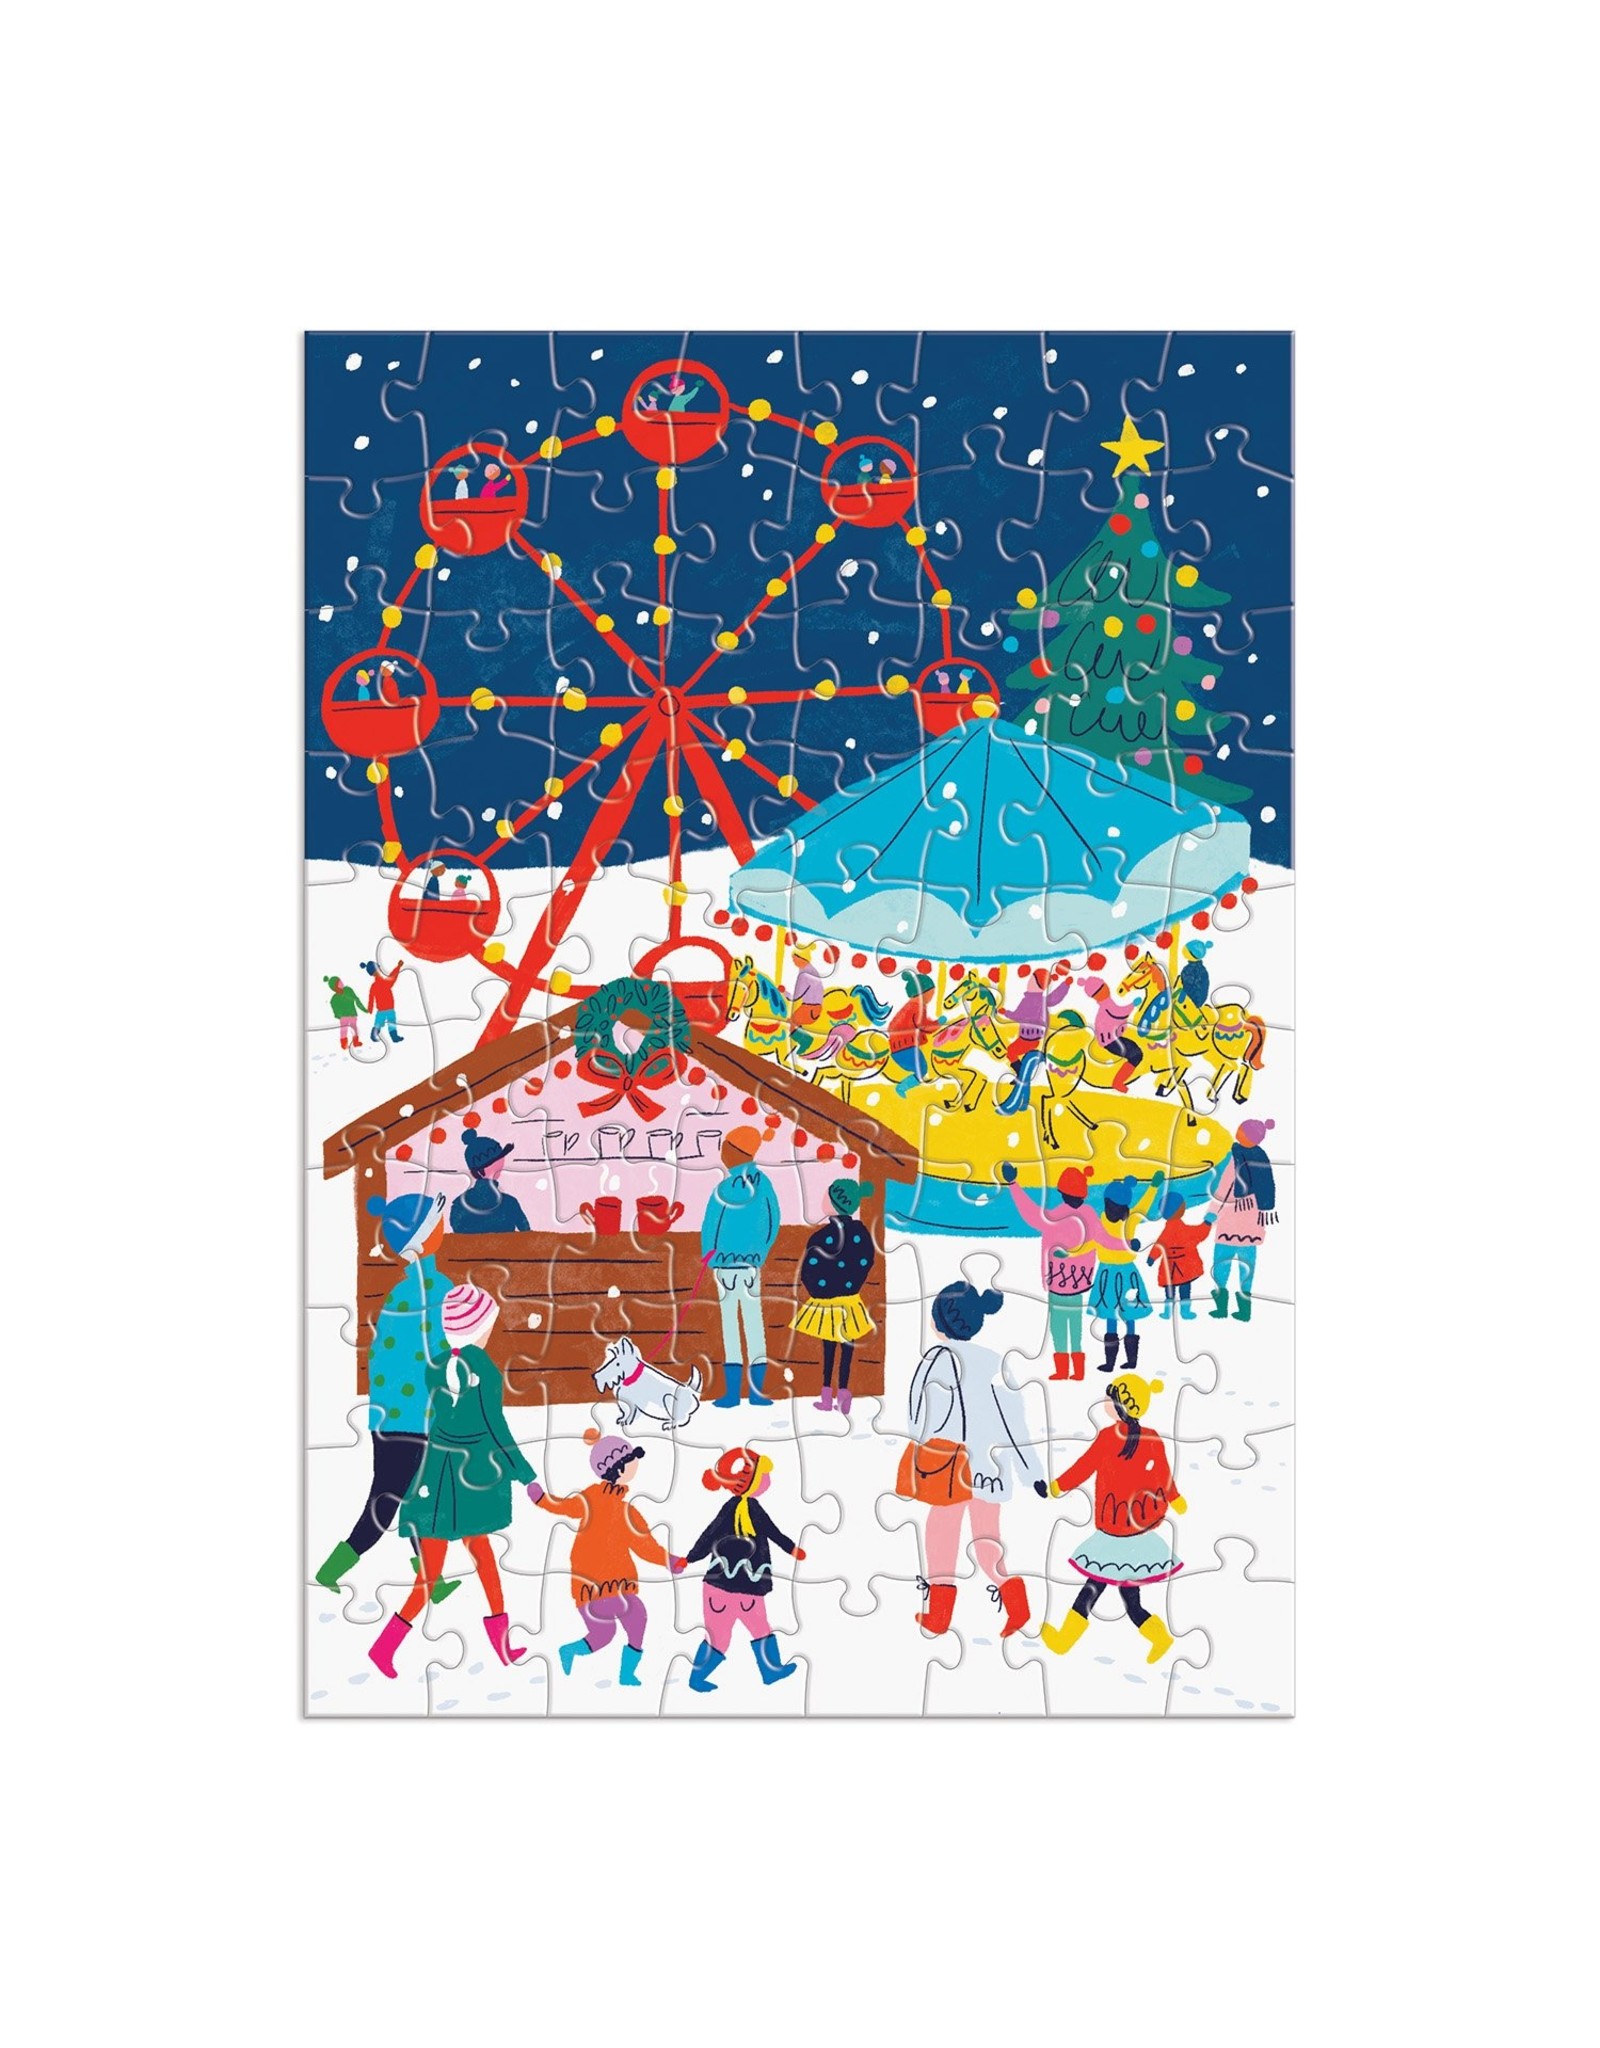 Galison Louise Cunningham Merry and Bright 12 Days of Christmas Advent Puzzle Calendar